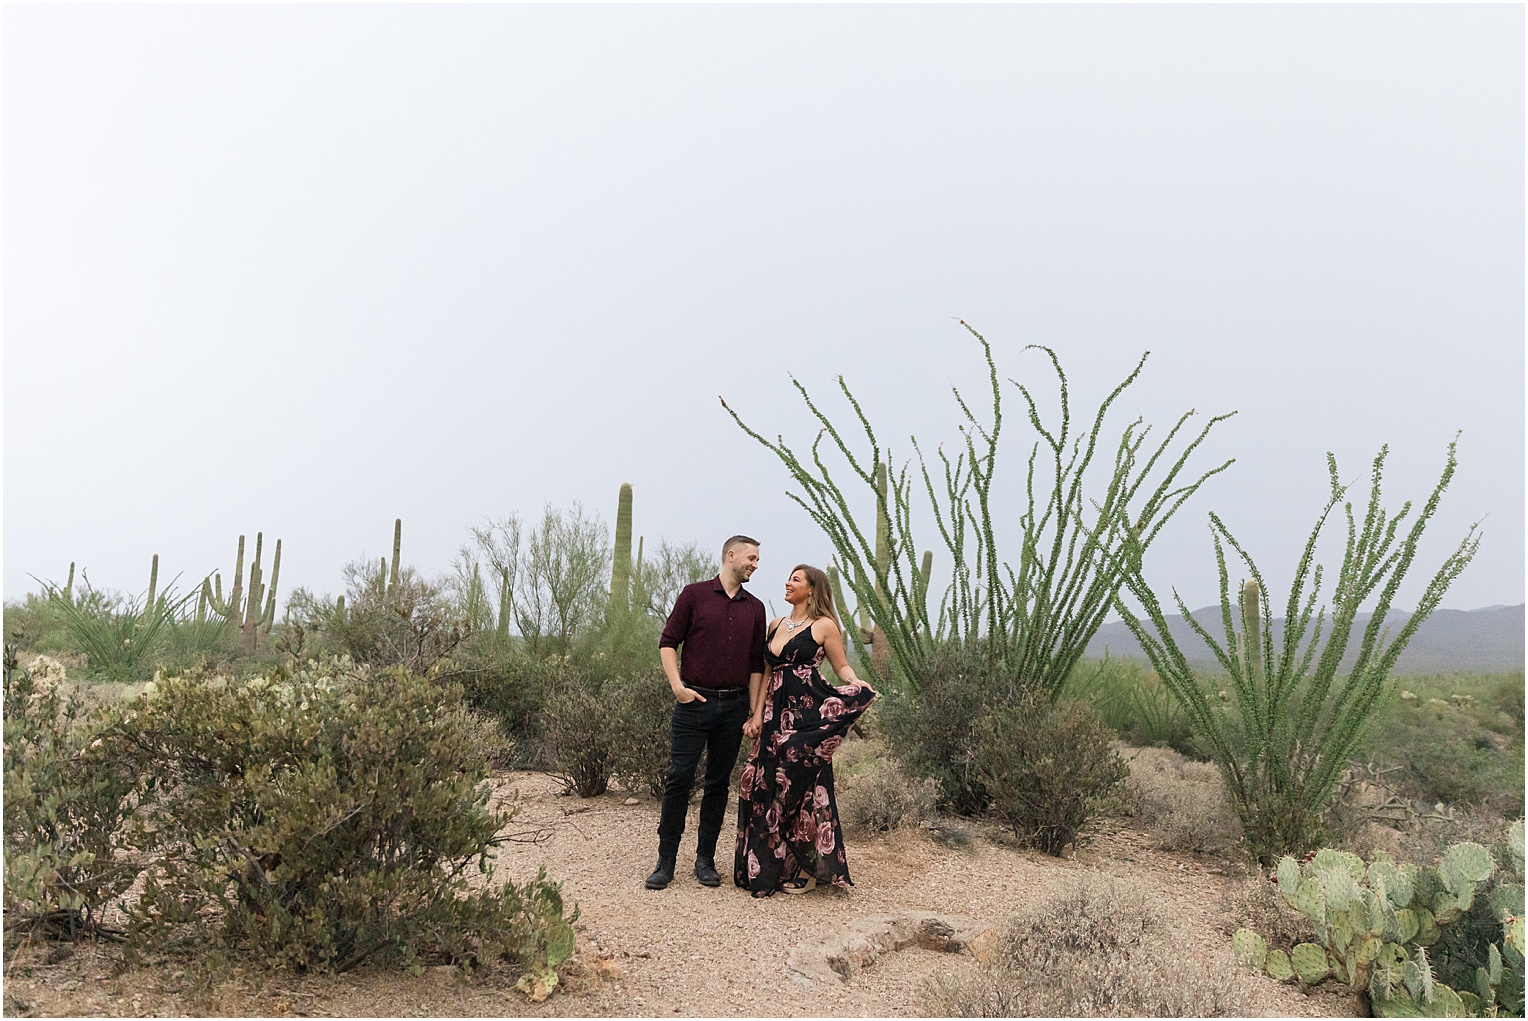 Gates Pass Engagement Session Tucson, AZ Nitasha + Kyle romantic and fun desert engagement session photo with bride in floor length black and pink floral dress